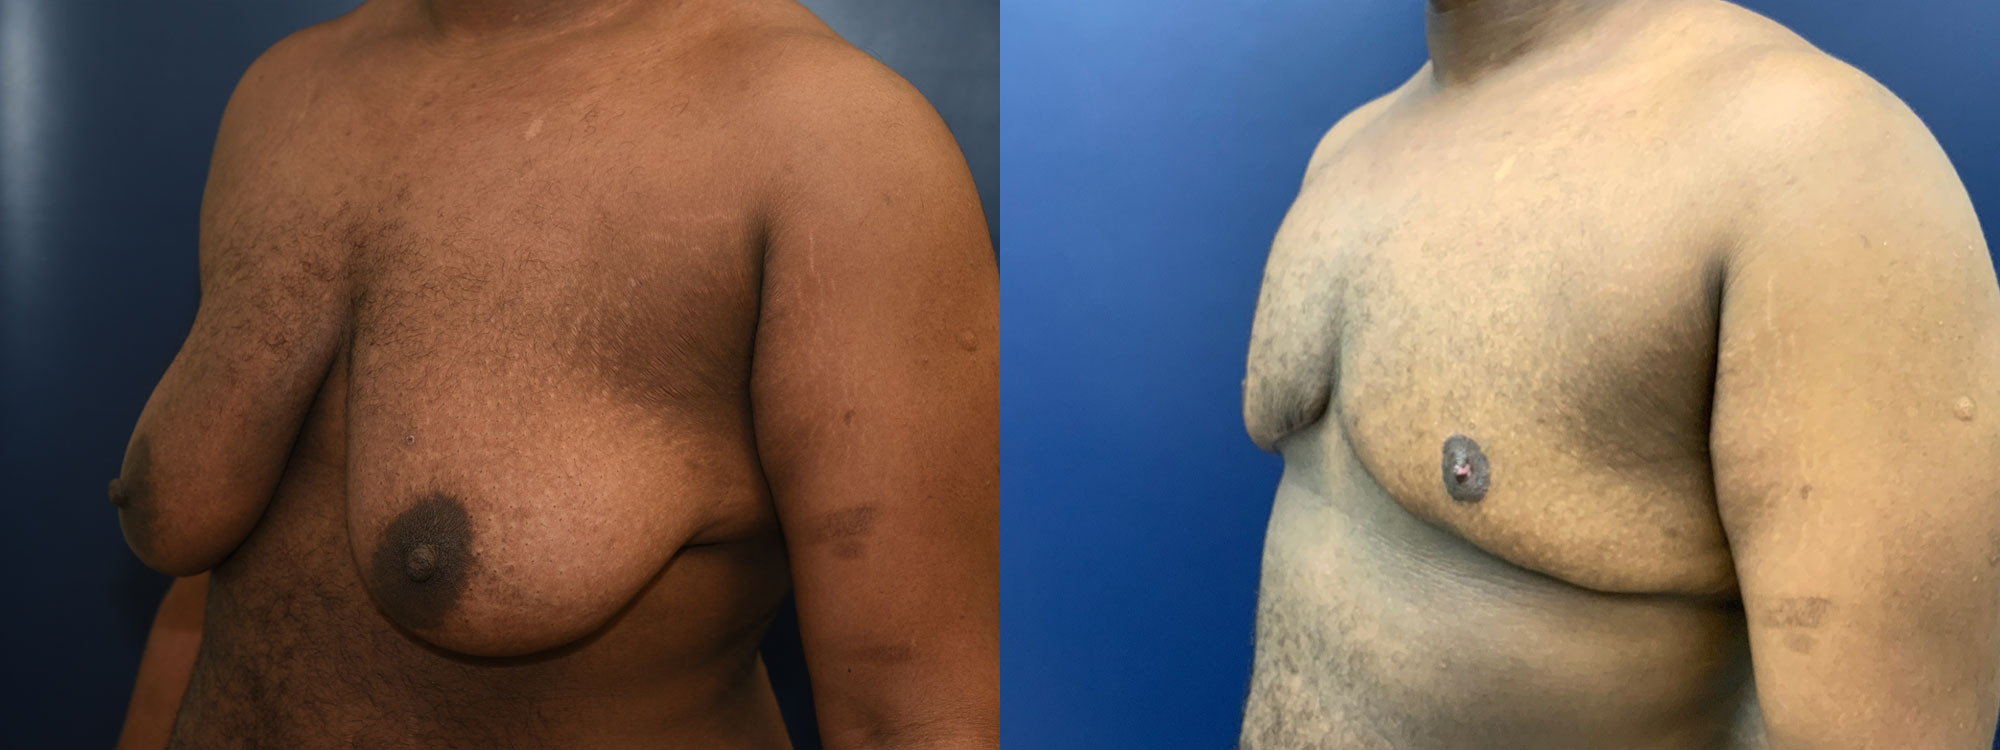 Female to Male Top Surgery Before and After Photo by Dr. Butler in Pensacola Florida